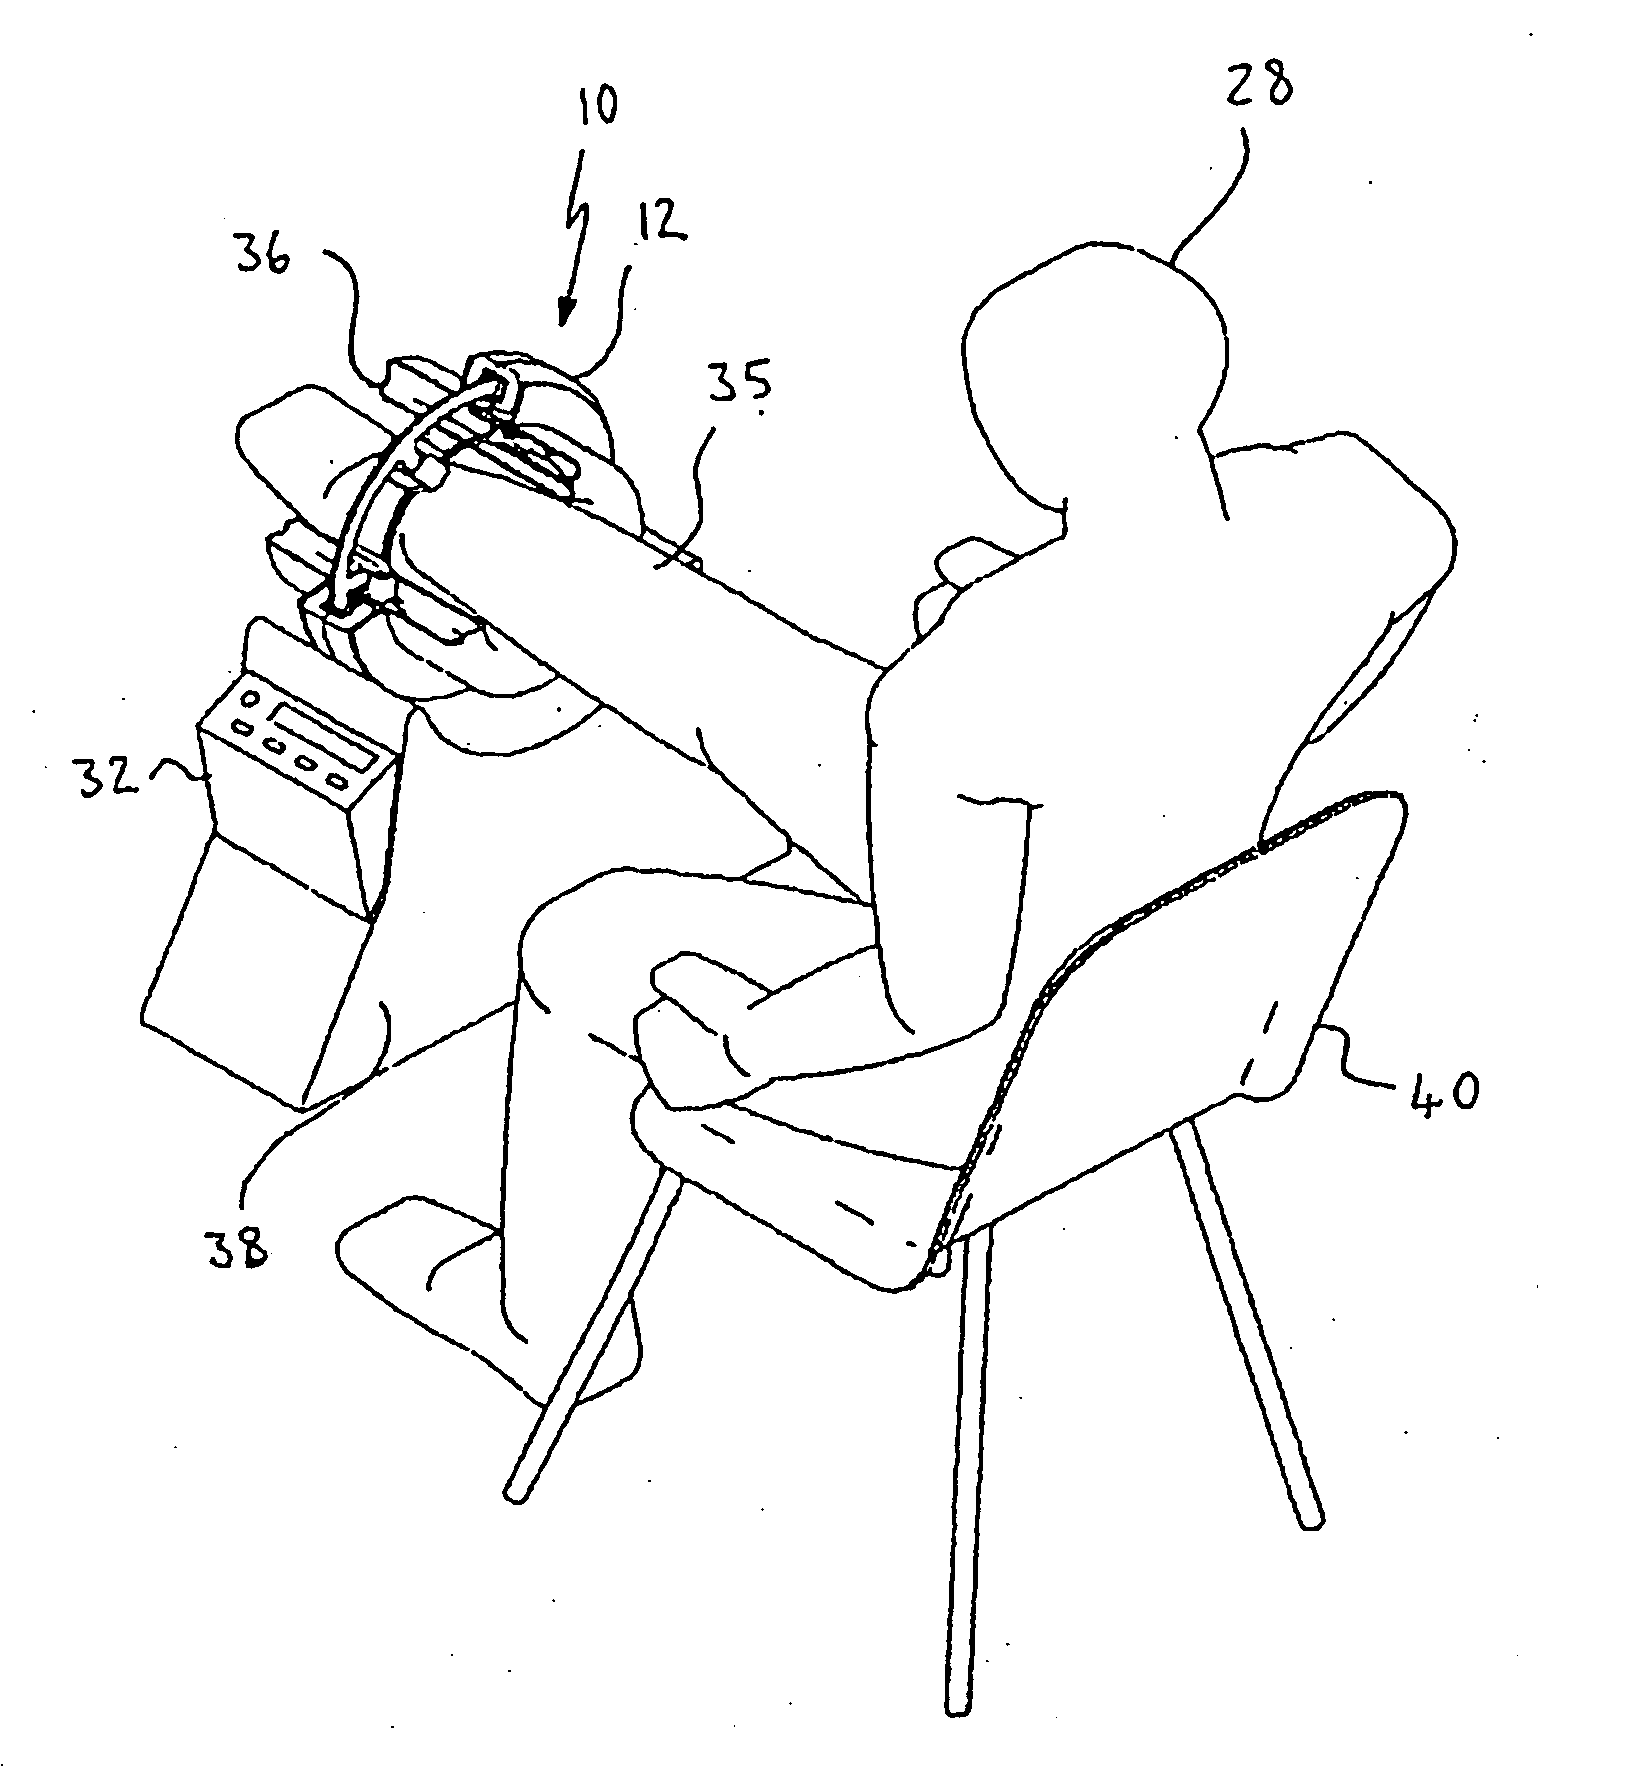 Medical apparatus, use and methods